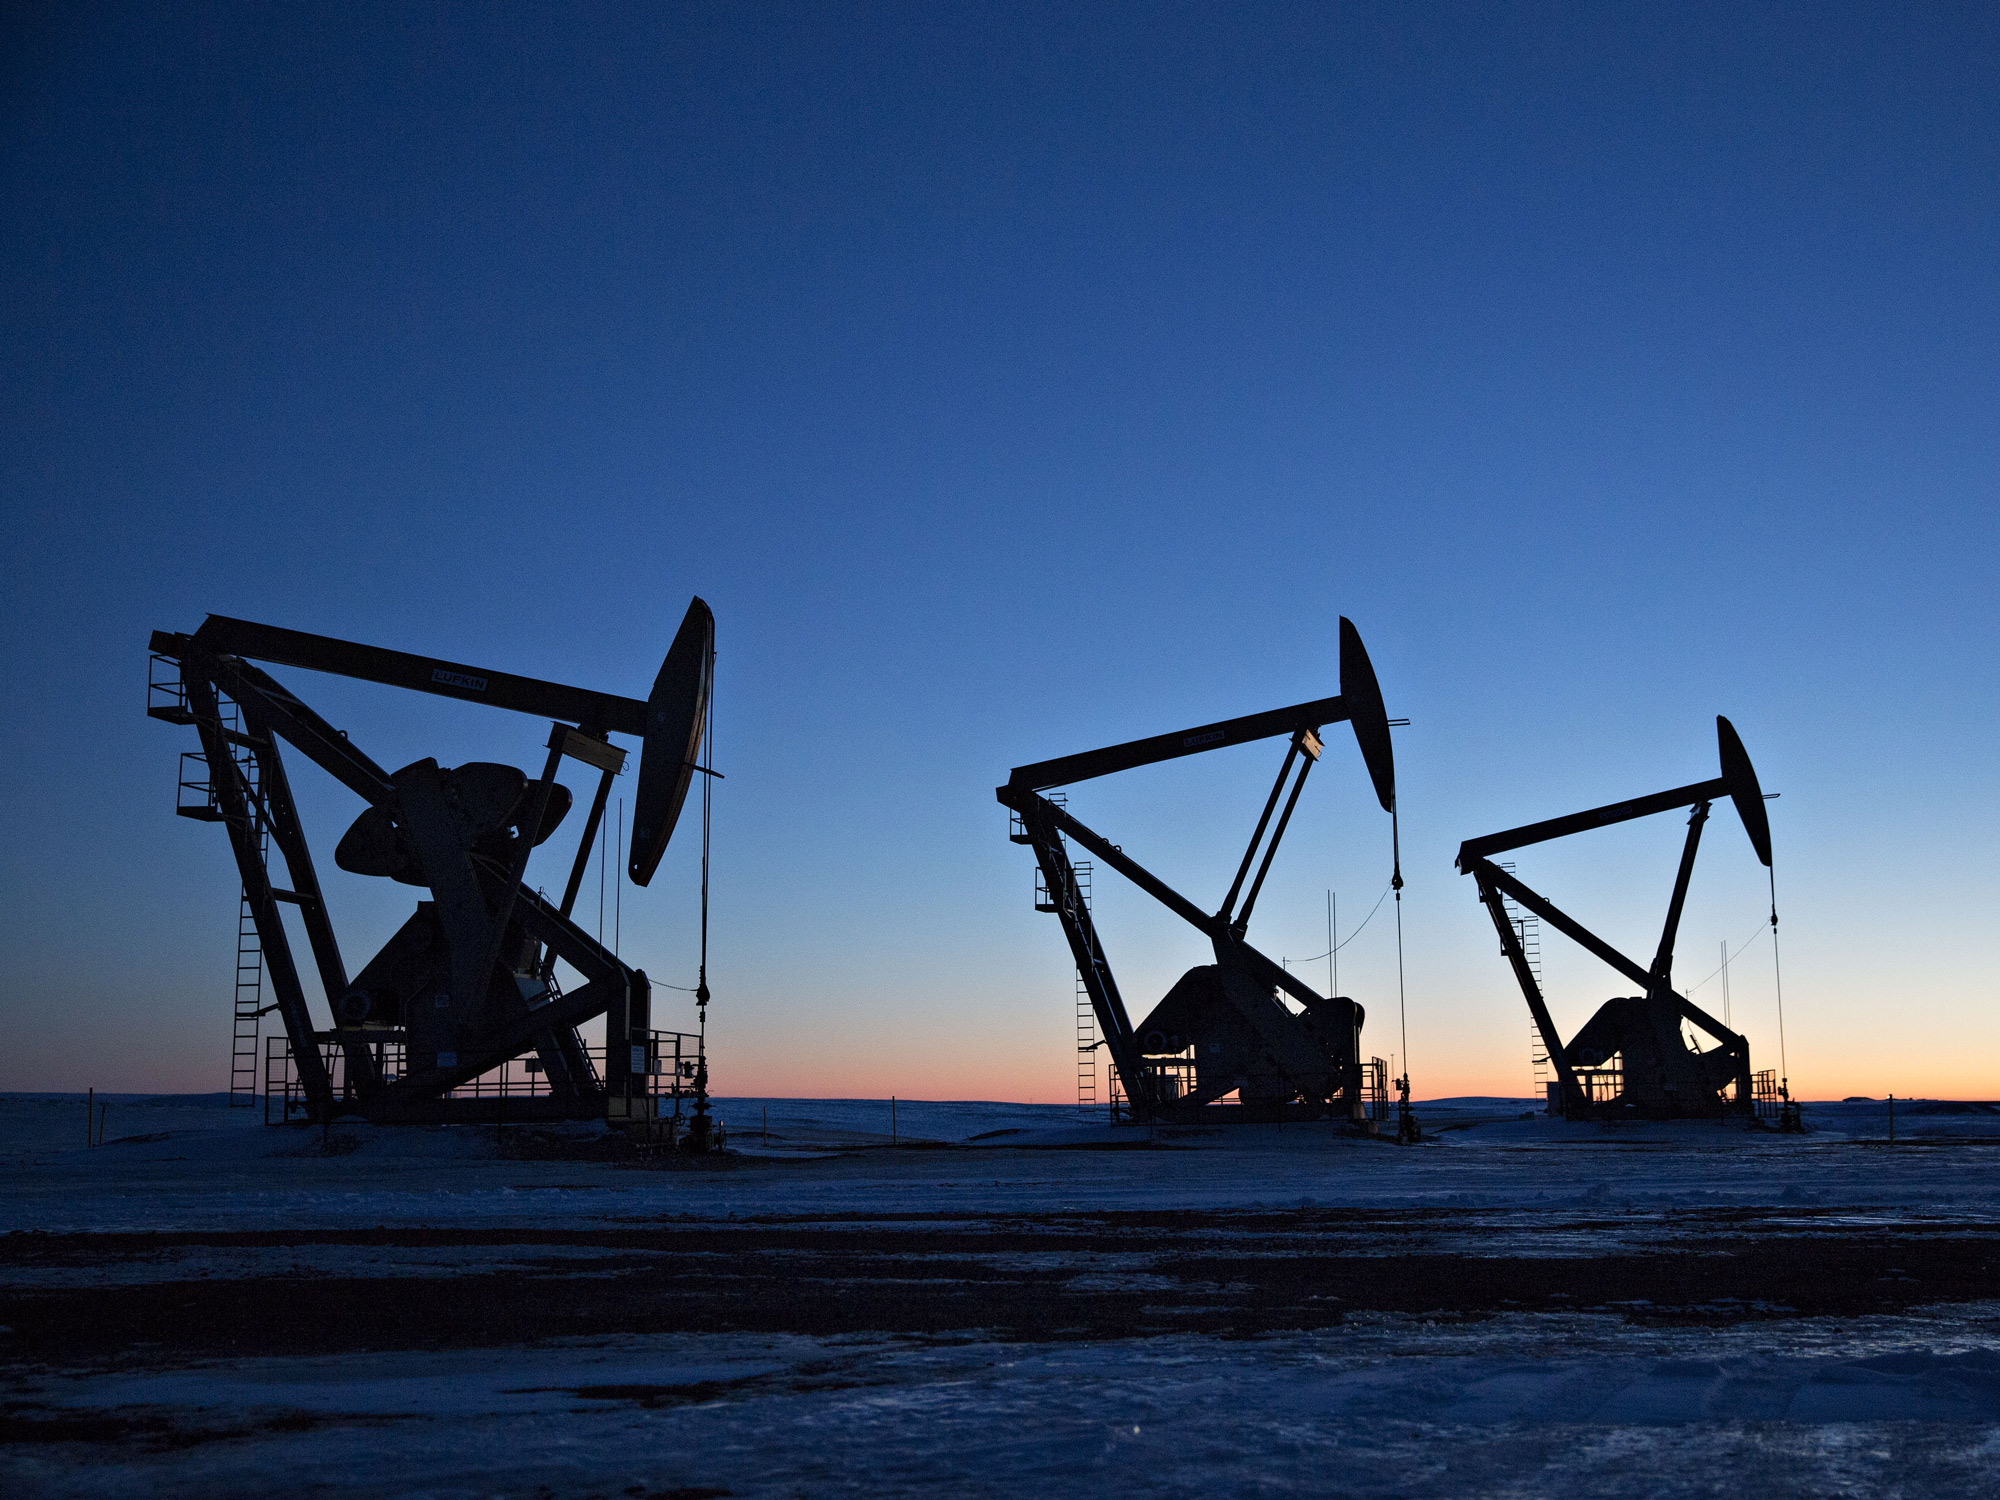 The silhouettes of pumpjacks are seen above oil wells in the Bakken Formation near Dickinson, North Dakota.